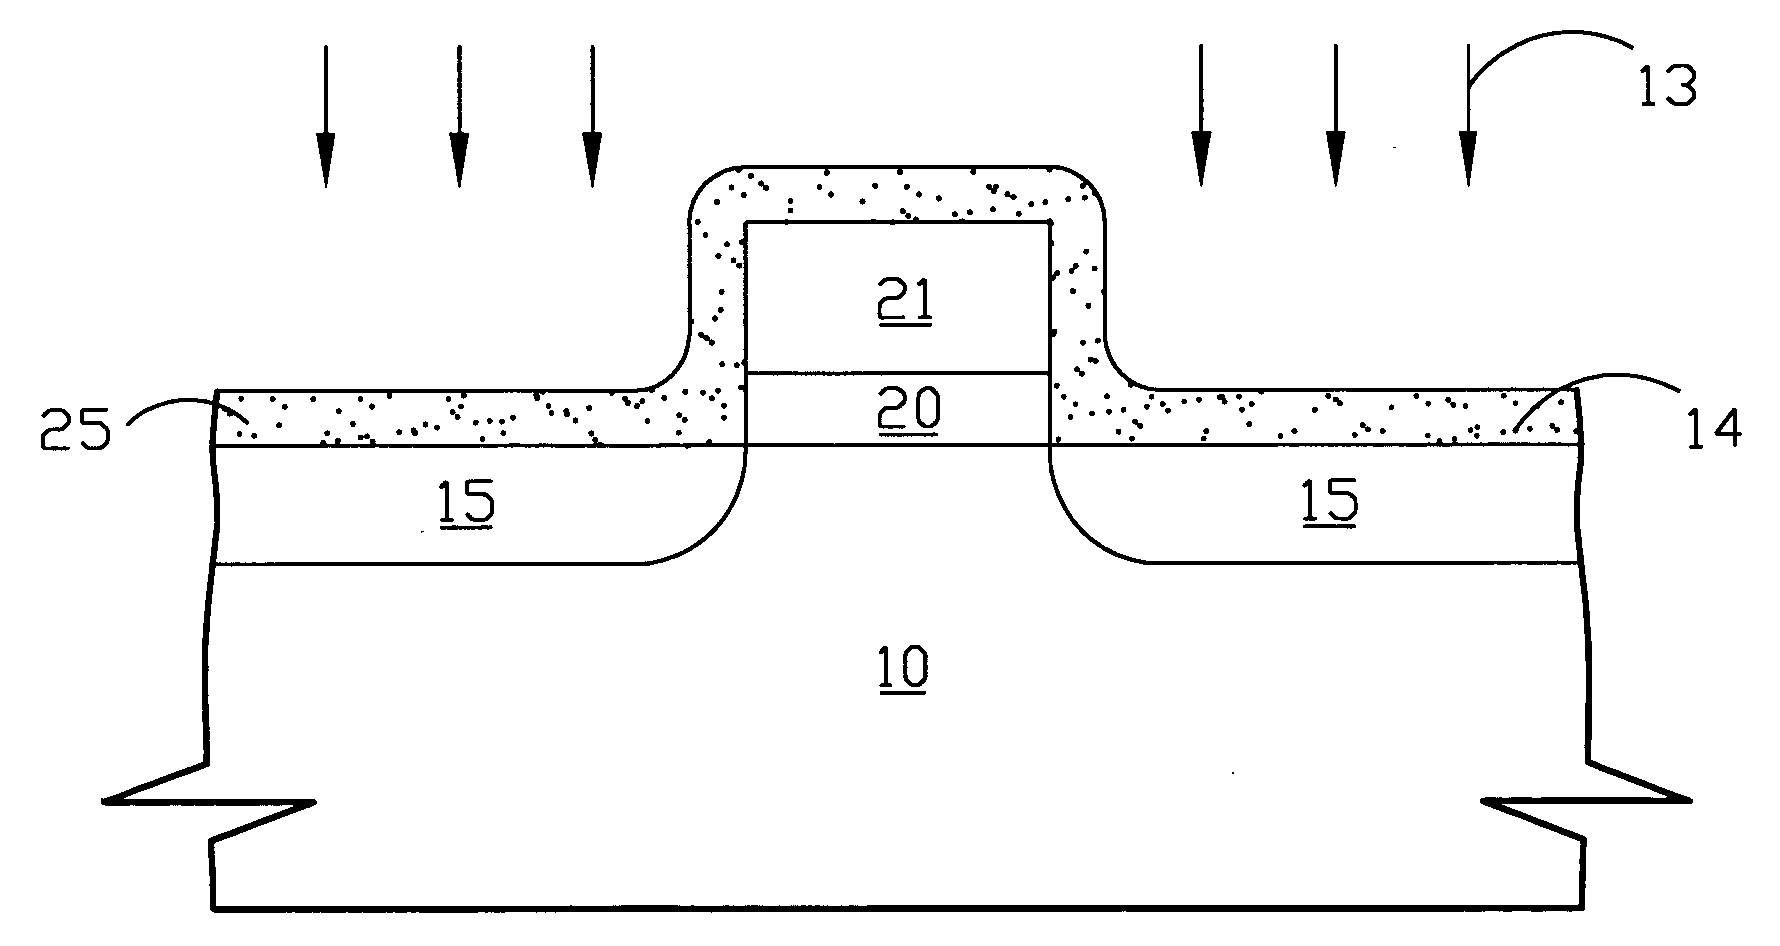 Method for forming a junction region of a semiconductor device